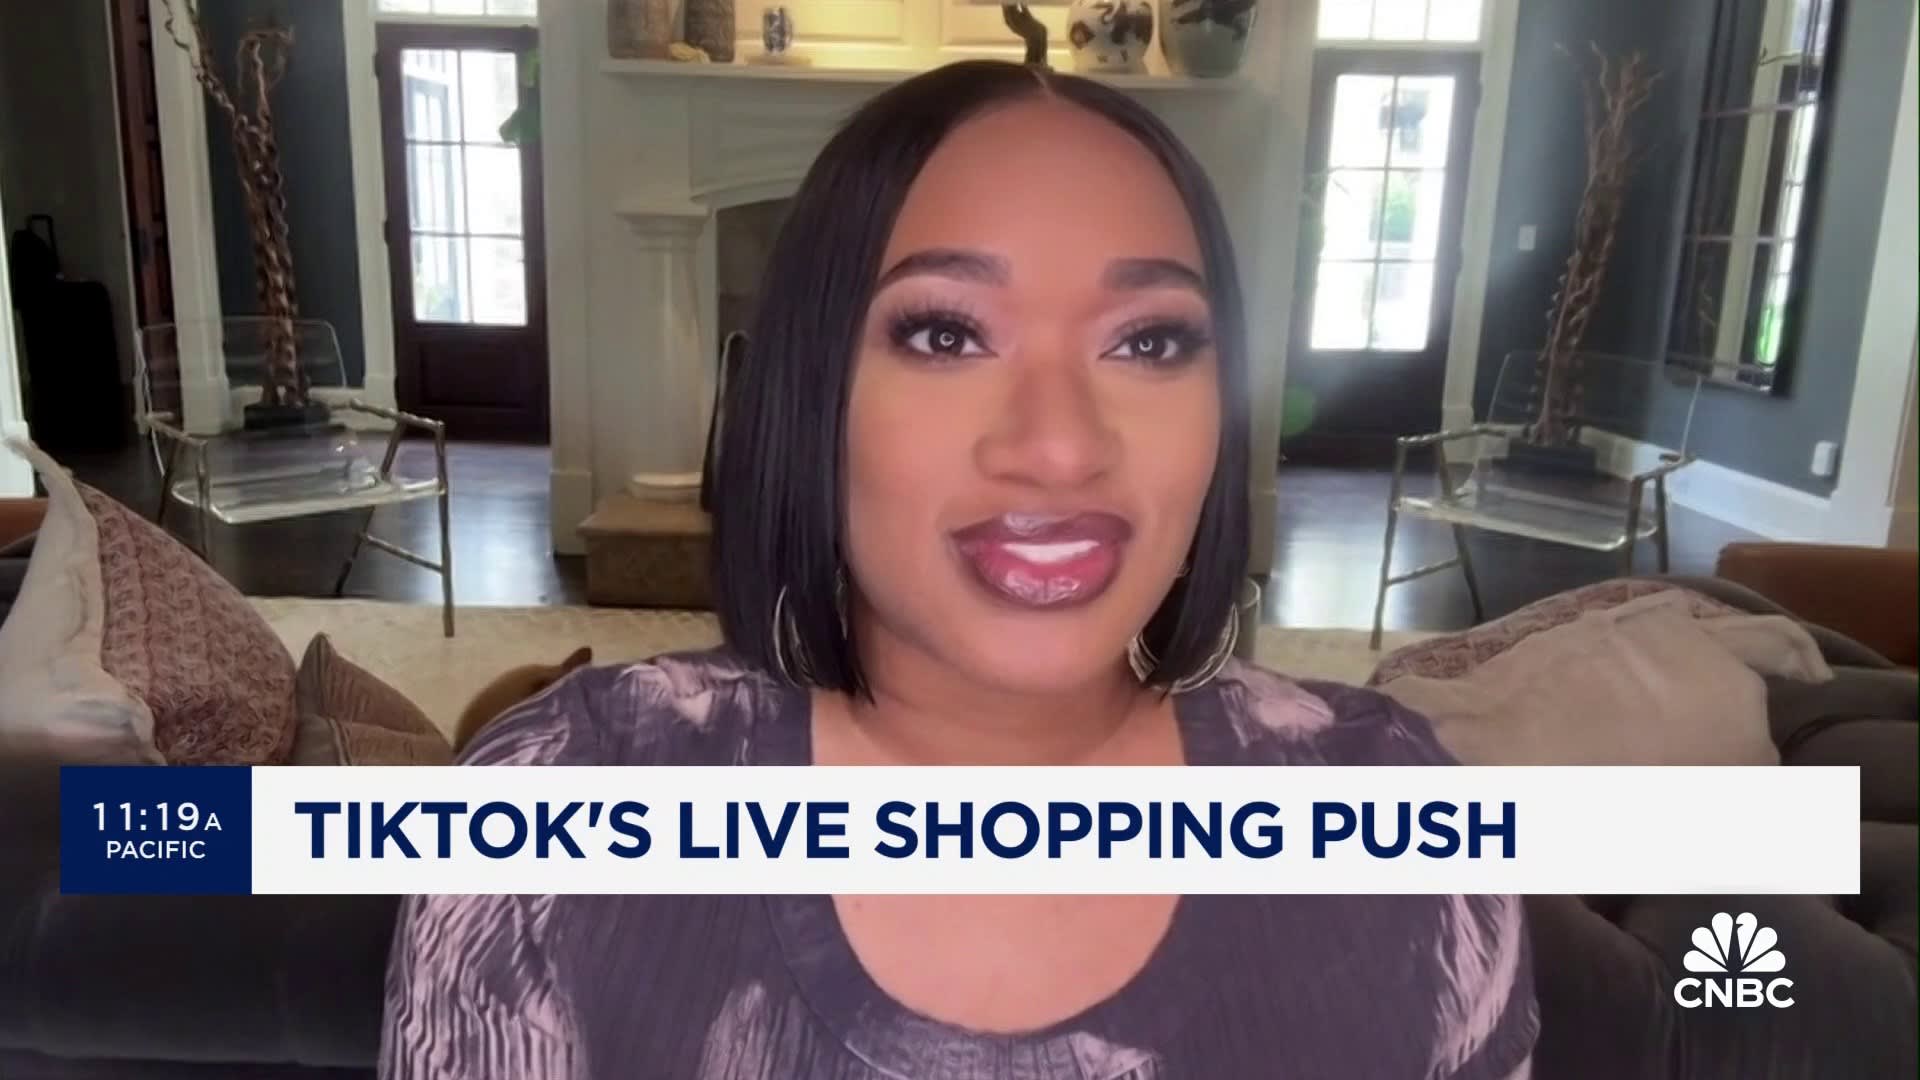 TikTok users find a windfall in live shopping push